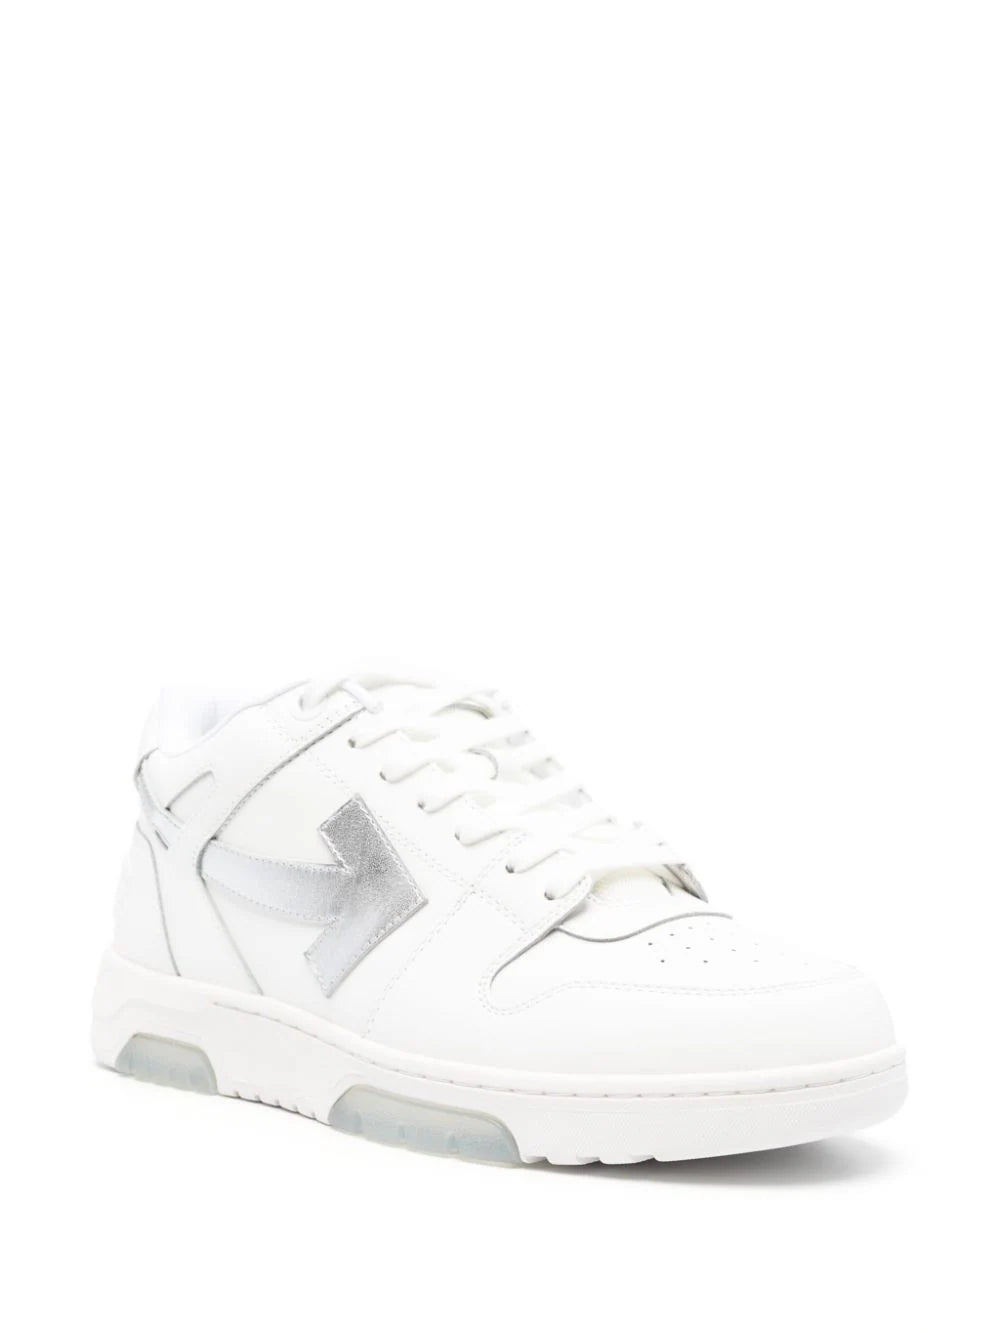 OFF-WHITE MEN Out Of Office Low Top Leather Sneakers White/Silver - MAISONDEFASHION.COM